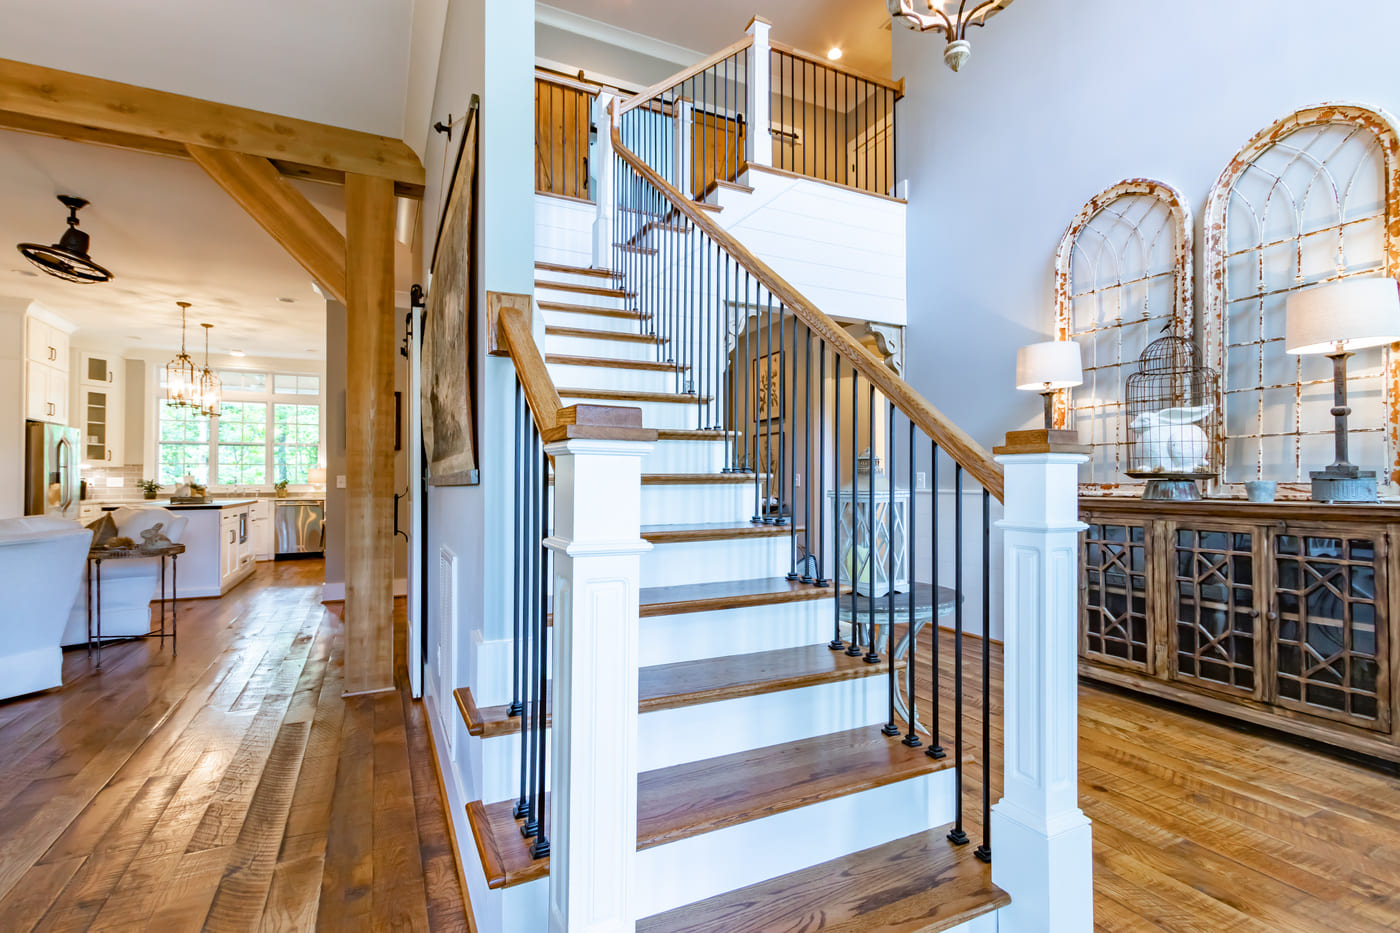 Why Should You Consider Installing Wooden Stairs?